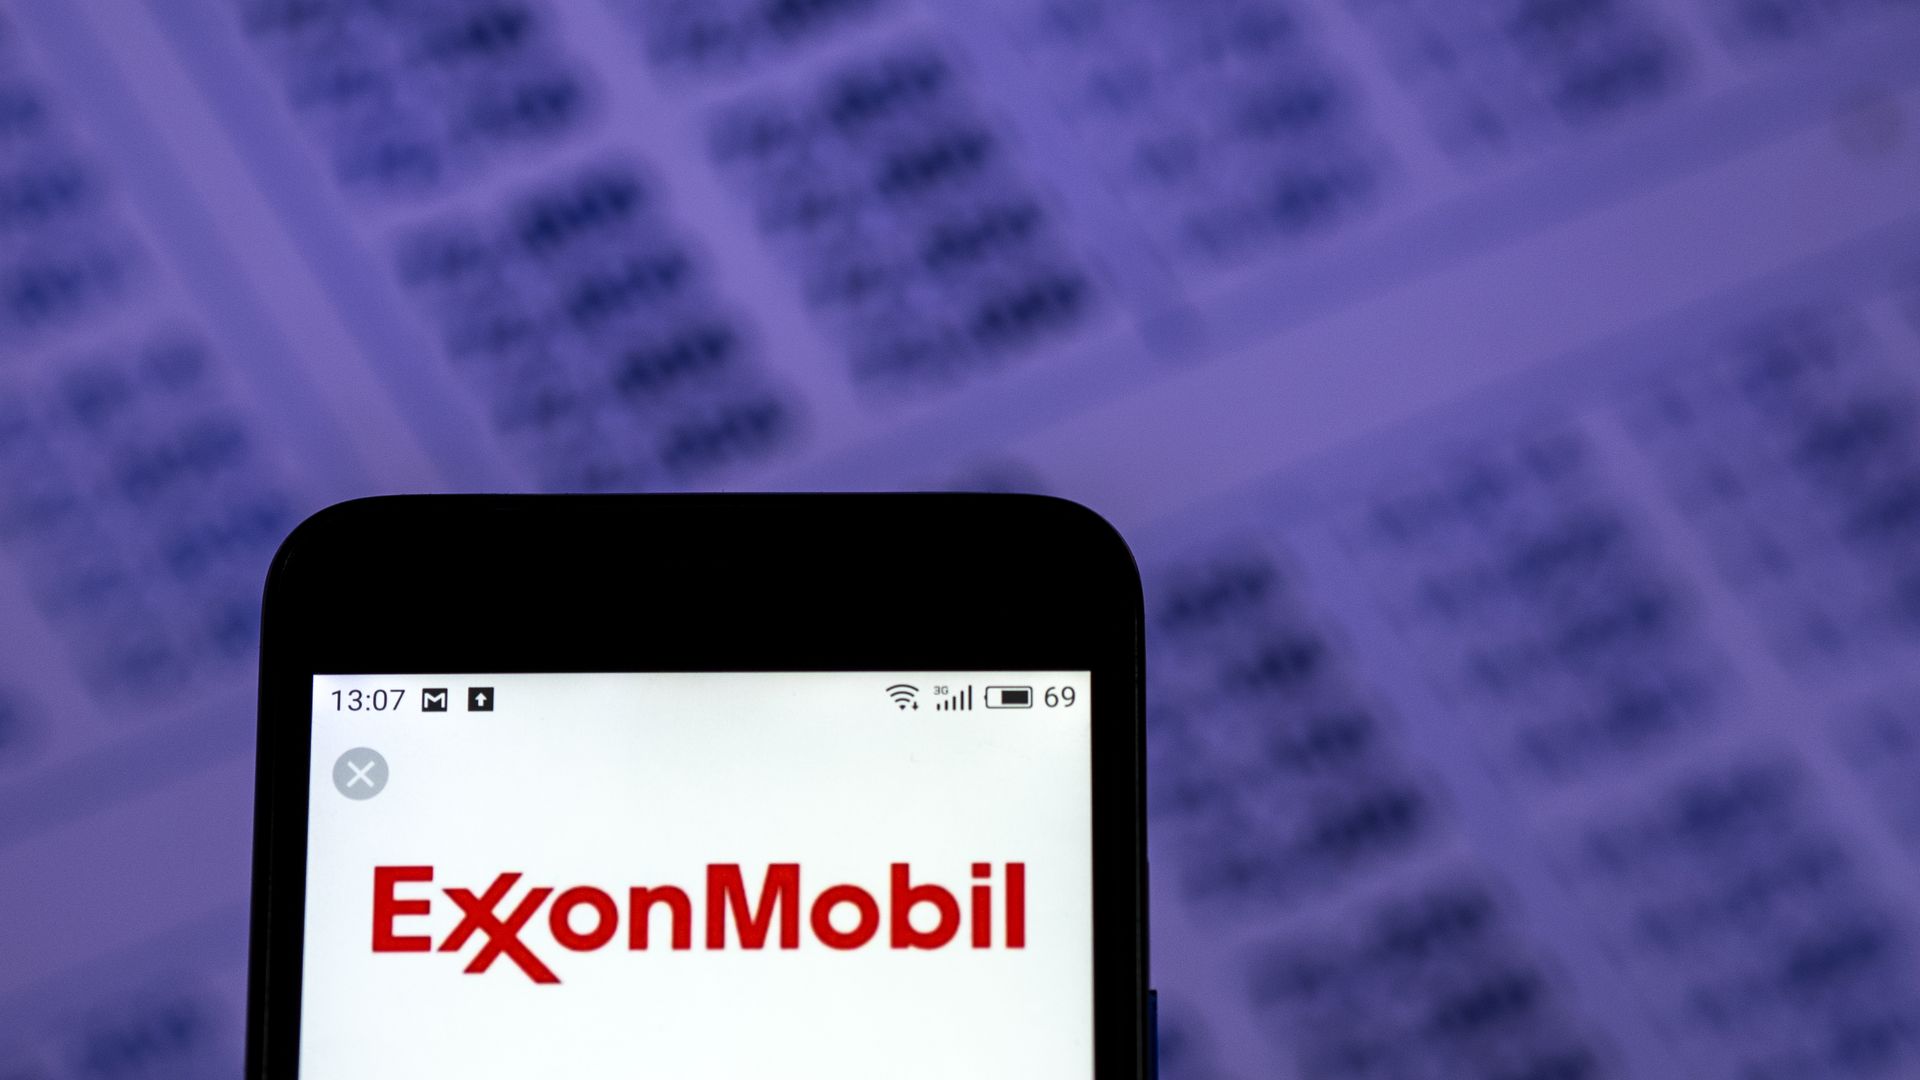 In this image, a phone displaying the ExxonMobil logo is displayed in front of a purple background with numbers.